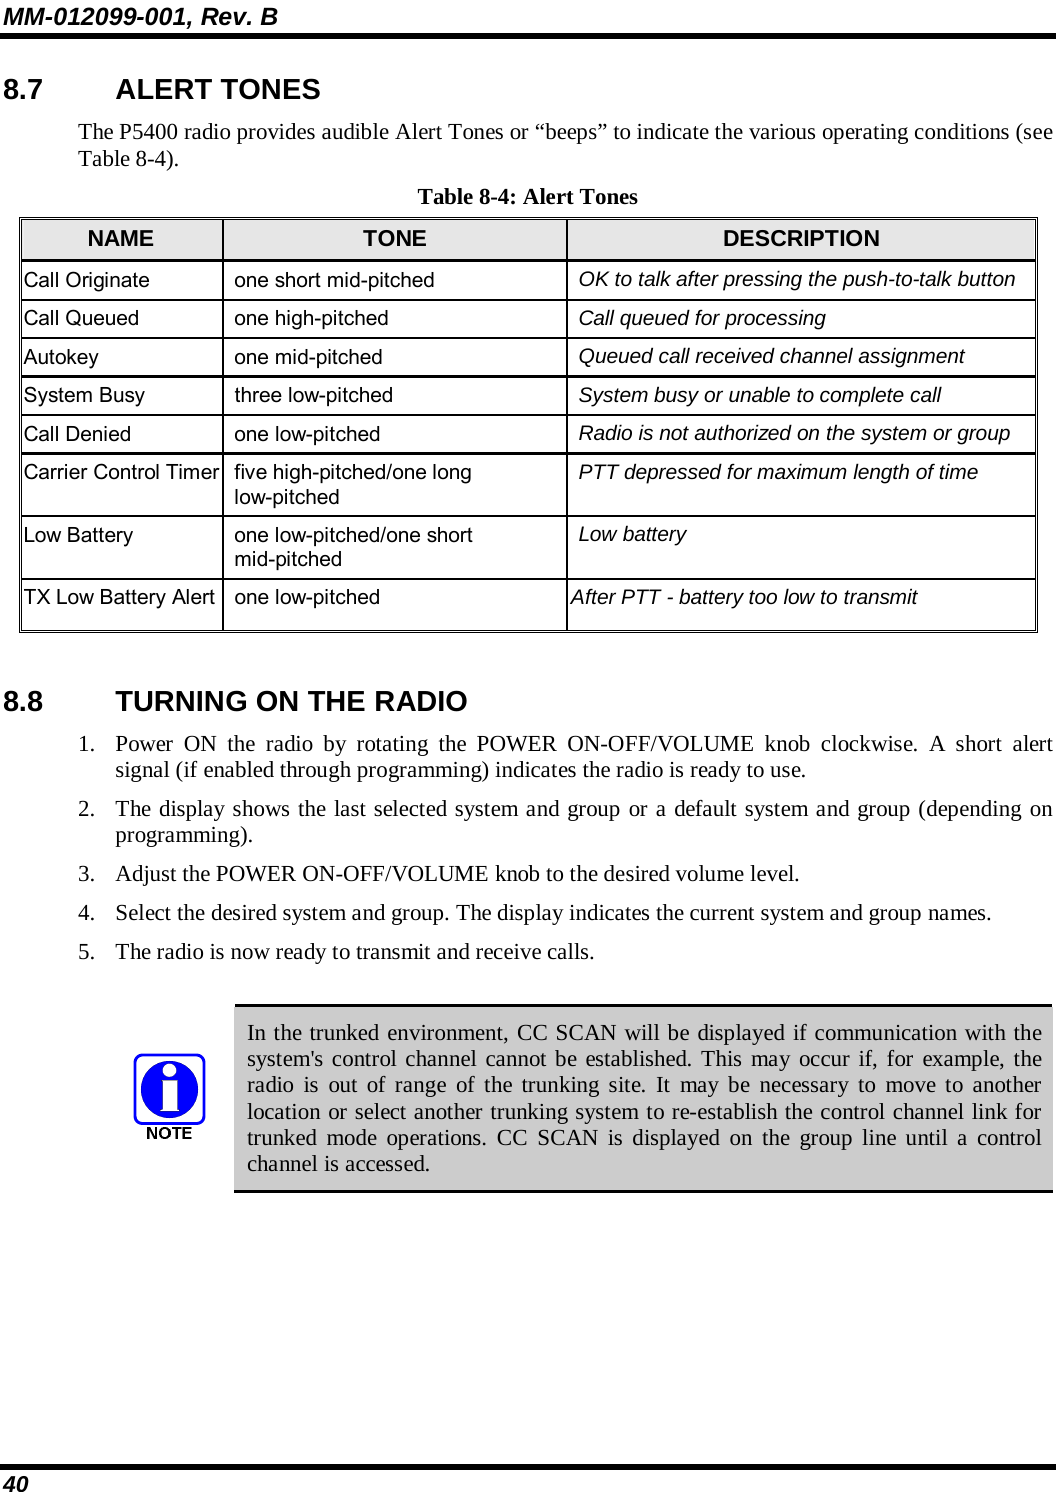 MM-012099-001, Rev. B 40 8.7 ALERT TONES The P5400 radio provides audible Alert Tones or “beeps” to indicate the various operating conditions (see Table 8-4). Table 8-4: Alert Tones NAME  TONE  DESCRIPTION Call Originate  one short mid-pitched  OK to talk after pressing the push-to-talk button Call Queued  one high-pitched  Call queued for processing Autokey one mid-pitched  Queued call received channel assignment System Busy  three low-pitched  System busy or unable to complete call Call Denied  one low-pitched  Radio is not authorized on the system or group Carrier Control Timer  five high-pitched/one long low-pitched PTT depressed for maximum length of time Low Battery  one low-pitched/one short mid-pitched Low battery TX Low Battery Alert  one low-pitched  After PTT - battery too low to transmit  8.8  TURNING ON THE RADIO 1. Power ON the radio by rotating the POWER ON-OFF/VOLUME knob clockwise. A short alert signal (if enabled through programming) indicates the radio is ready to use.  2. The display shows the last selected system and group or a default system and group (depending on programming).  3. Adjust the POWER ON-OFF/VOLUME knob to the desired volume level.  4. Select the desired system and group. The display indicates the current system and group names.  5. The radio is now ready to transmit and receive calls.   In the trunked environment, CC SCAN will be displayed if communication with the system&apos;s control channel cannot be established. This may occur if, for example, the radio is out of range of the trunking site. It may be necessary to move to another location or select another trunking system to re-establish the control channel link for trunked mode operations. CC SCAN is displayed on the group line until a control channel is accessed.  